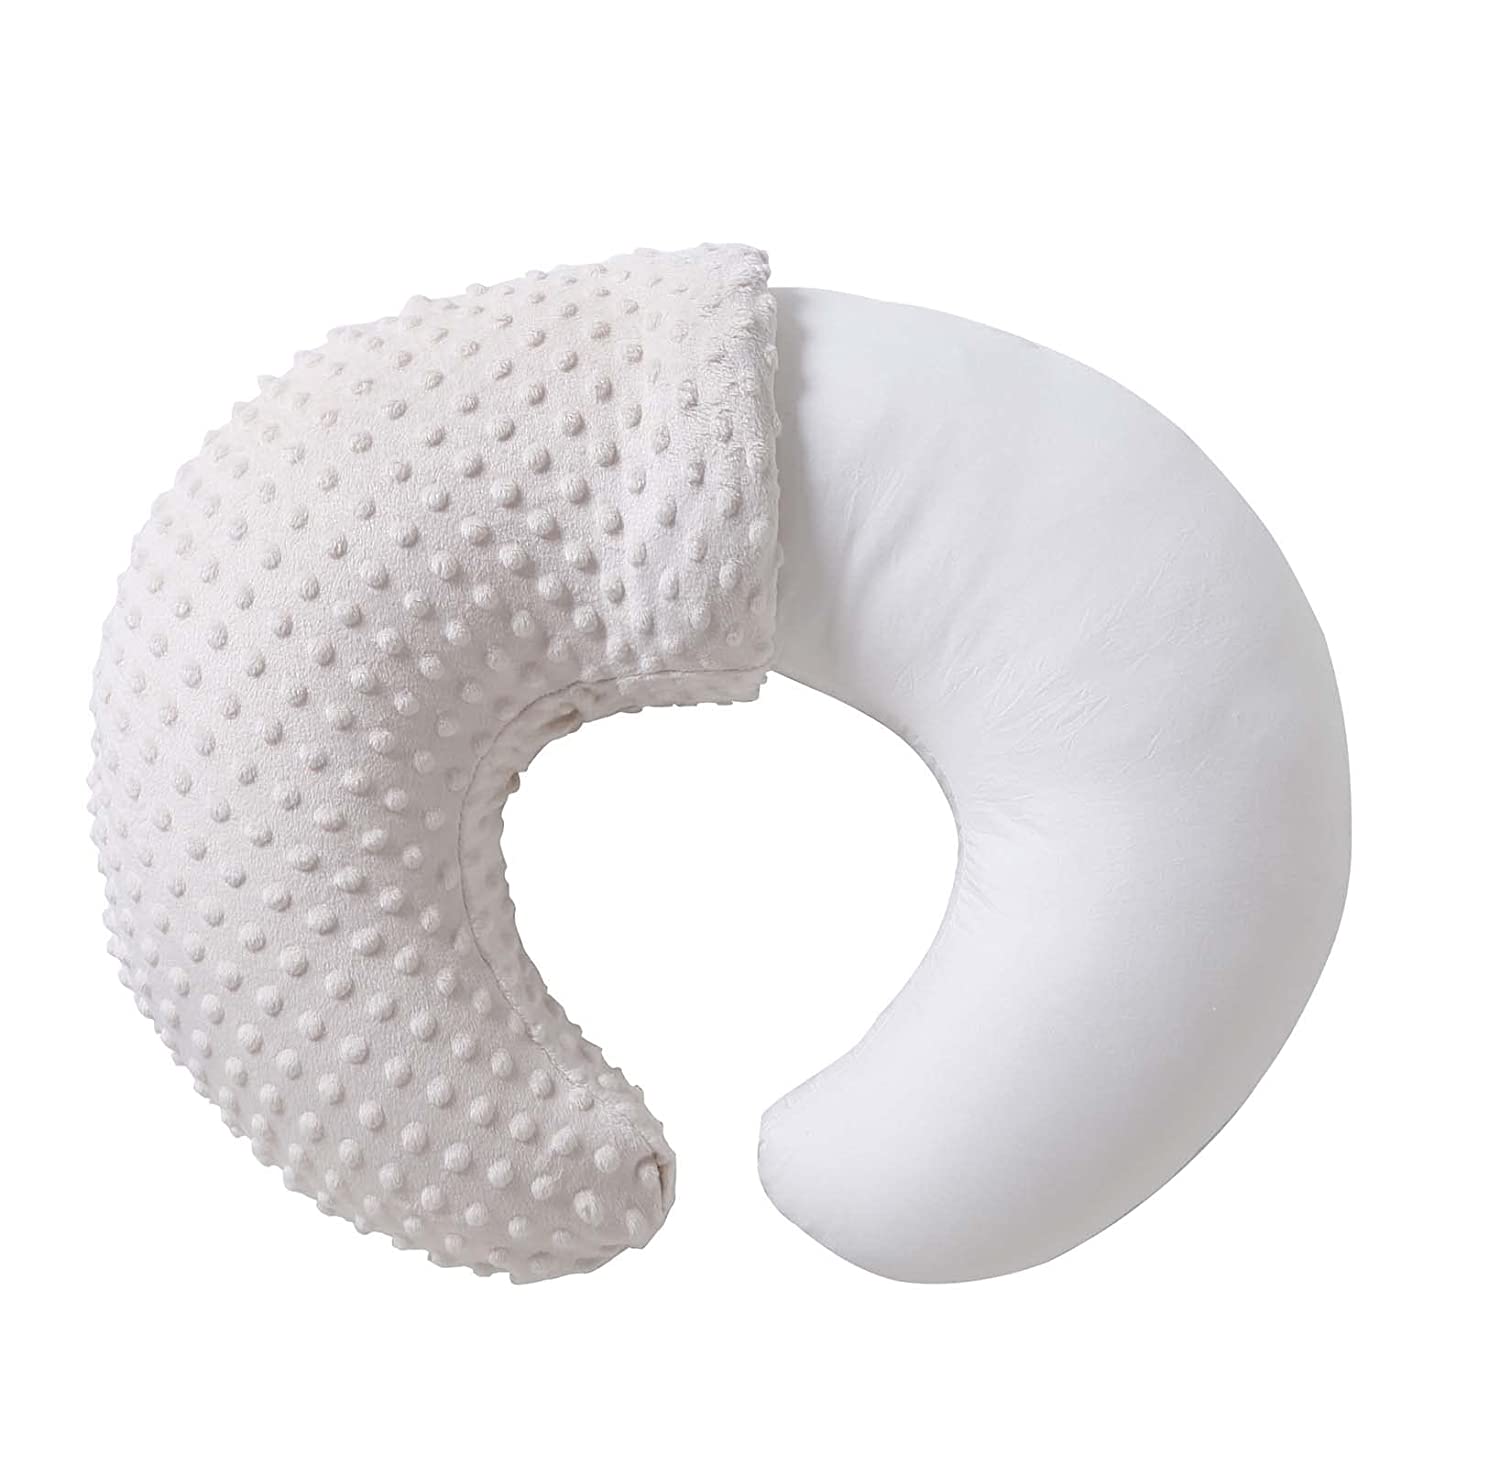 Queness Nursing Pillow and Positioner